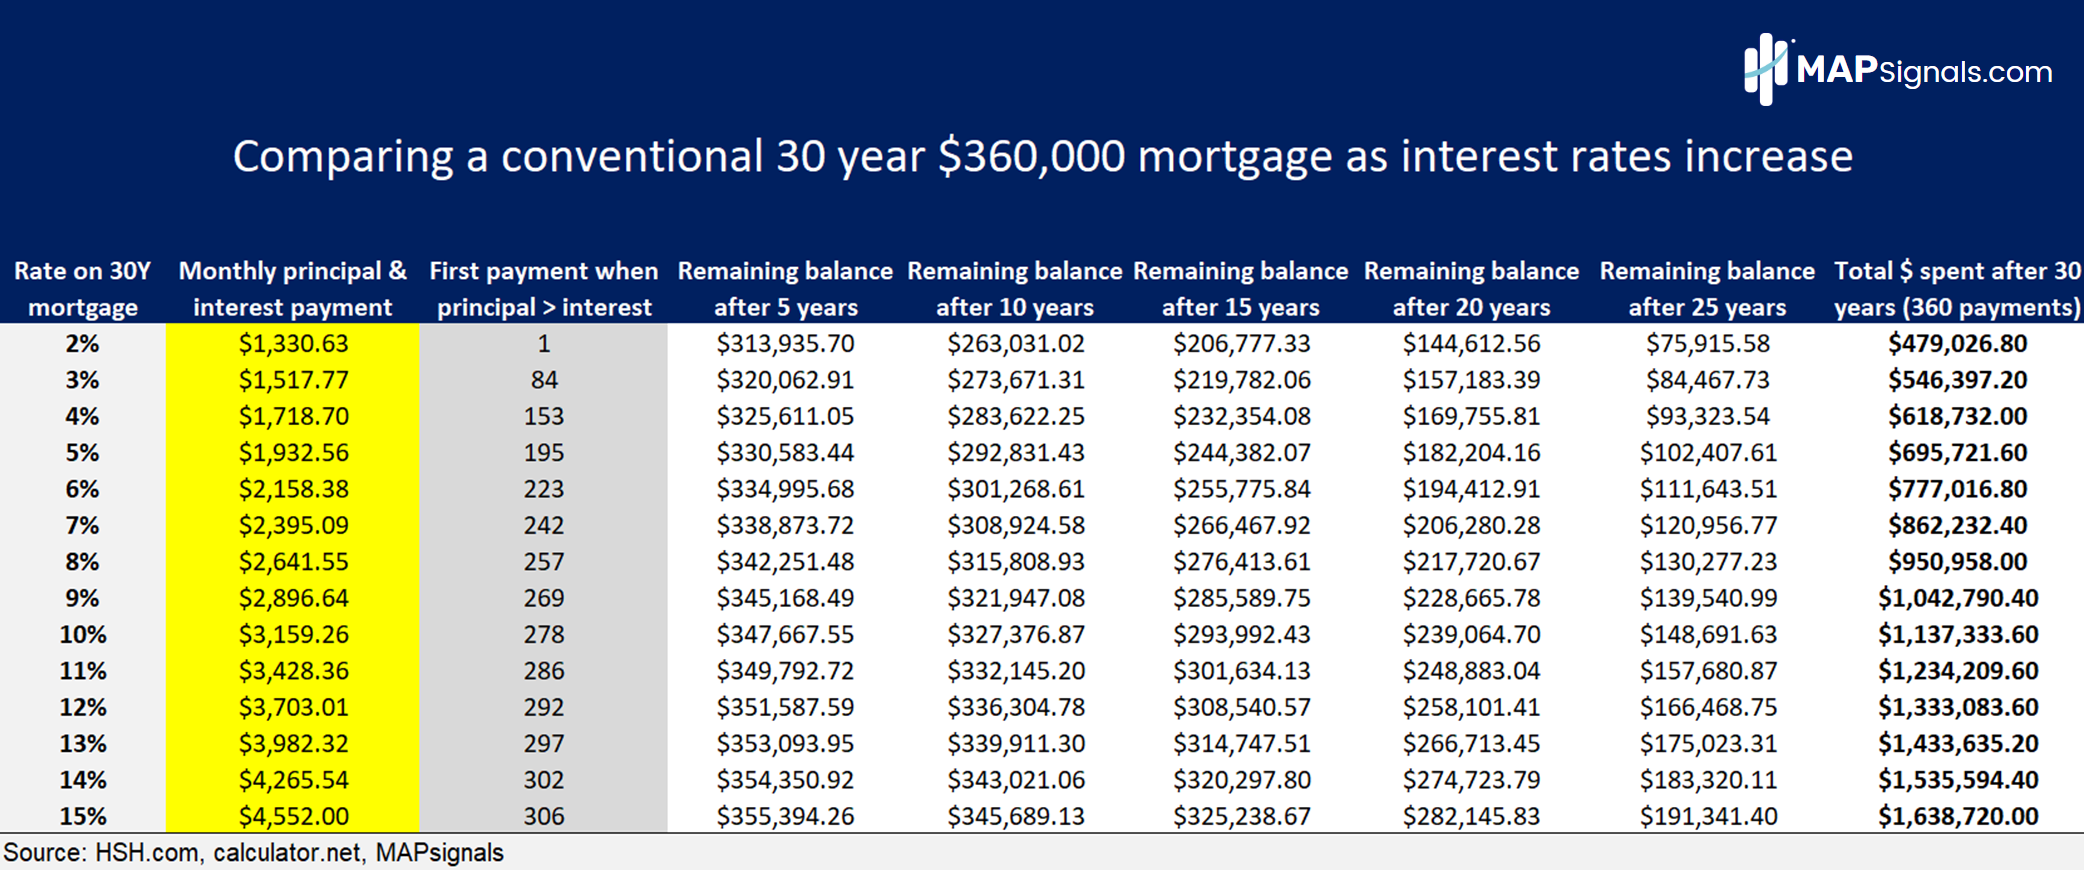 30 year mortgage rates as interest increases | MAPsignals